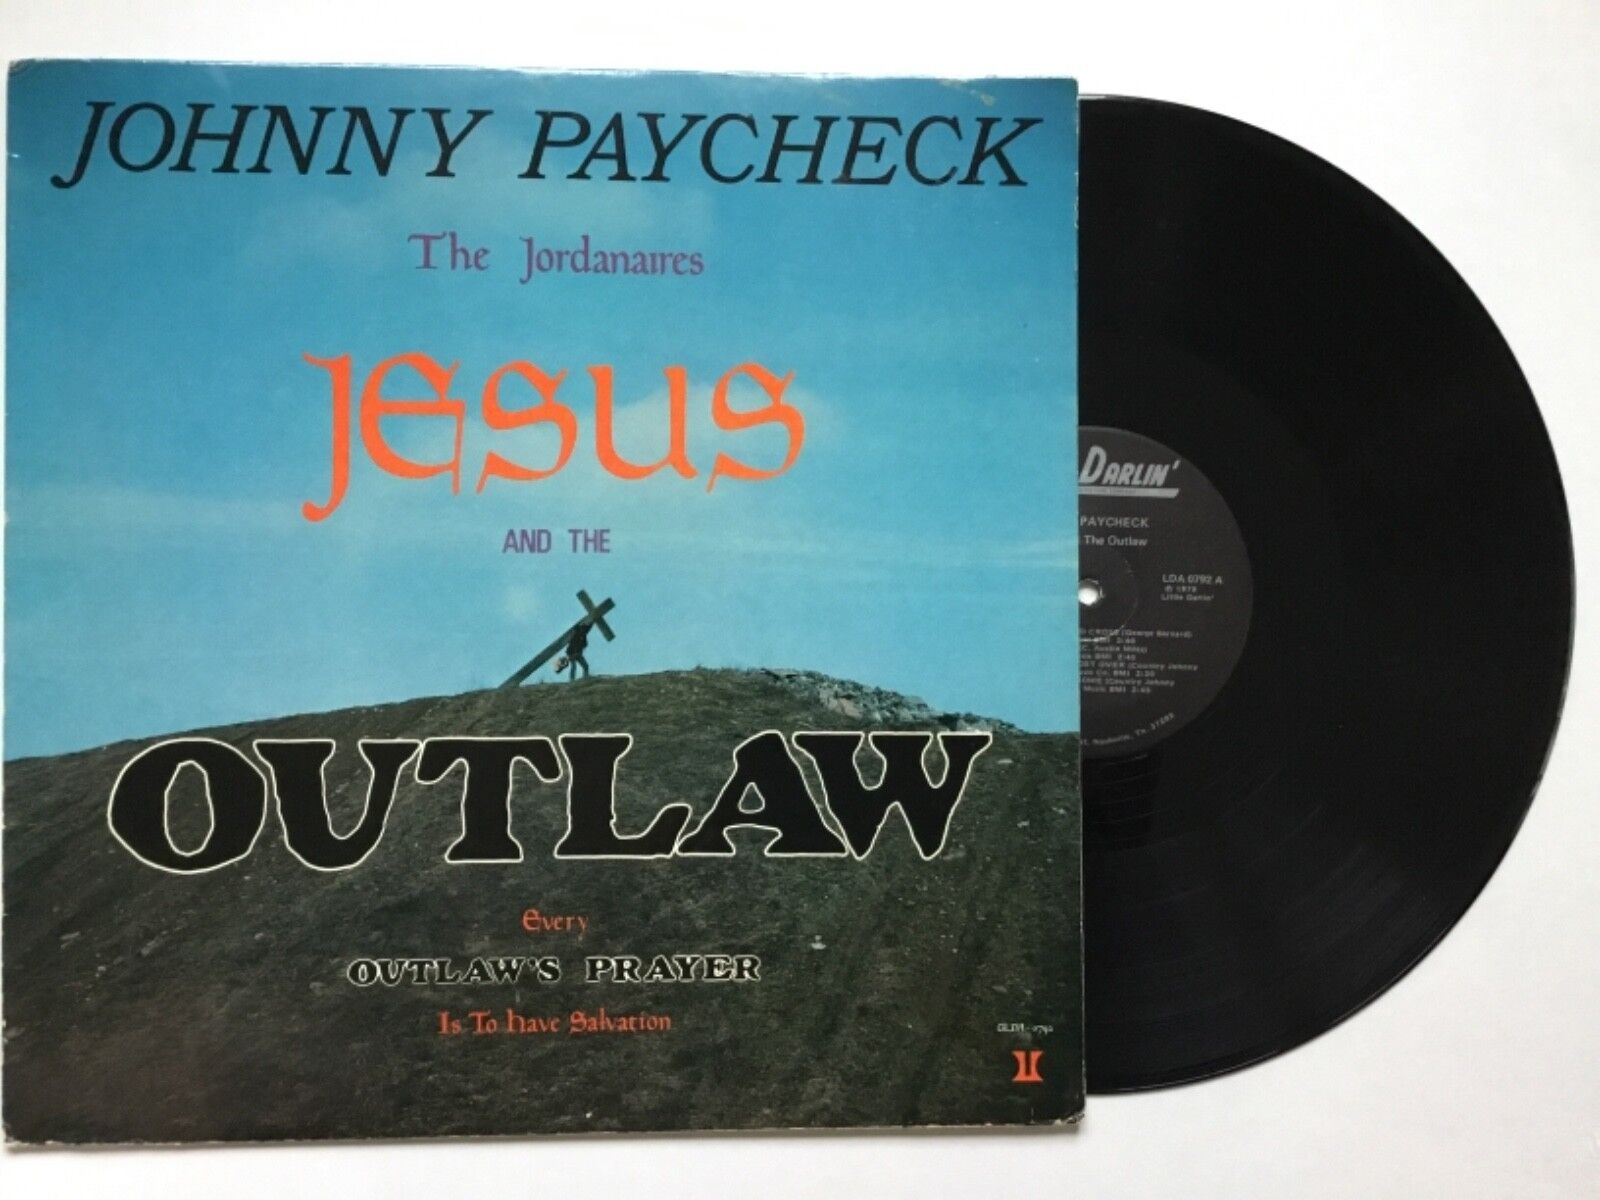 Johnny Paycheck & The Jordanaires: JESUS AND THE OUTLAW 1979 LP MINT+bonus CD